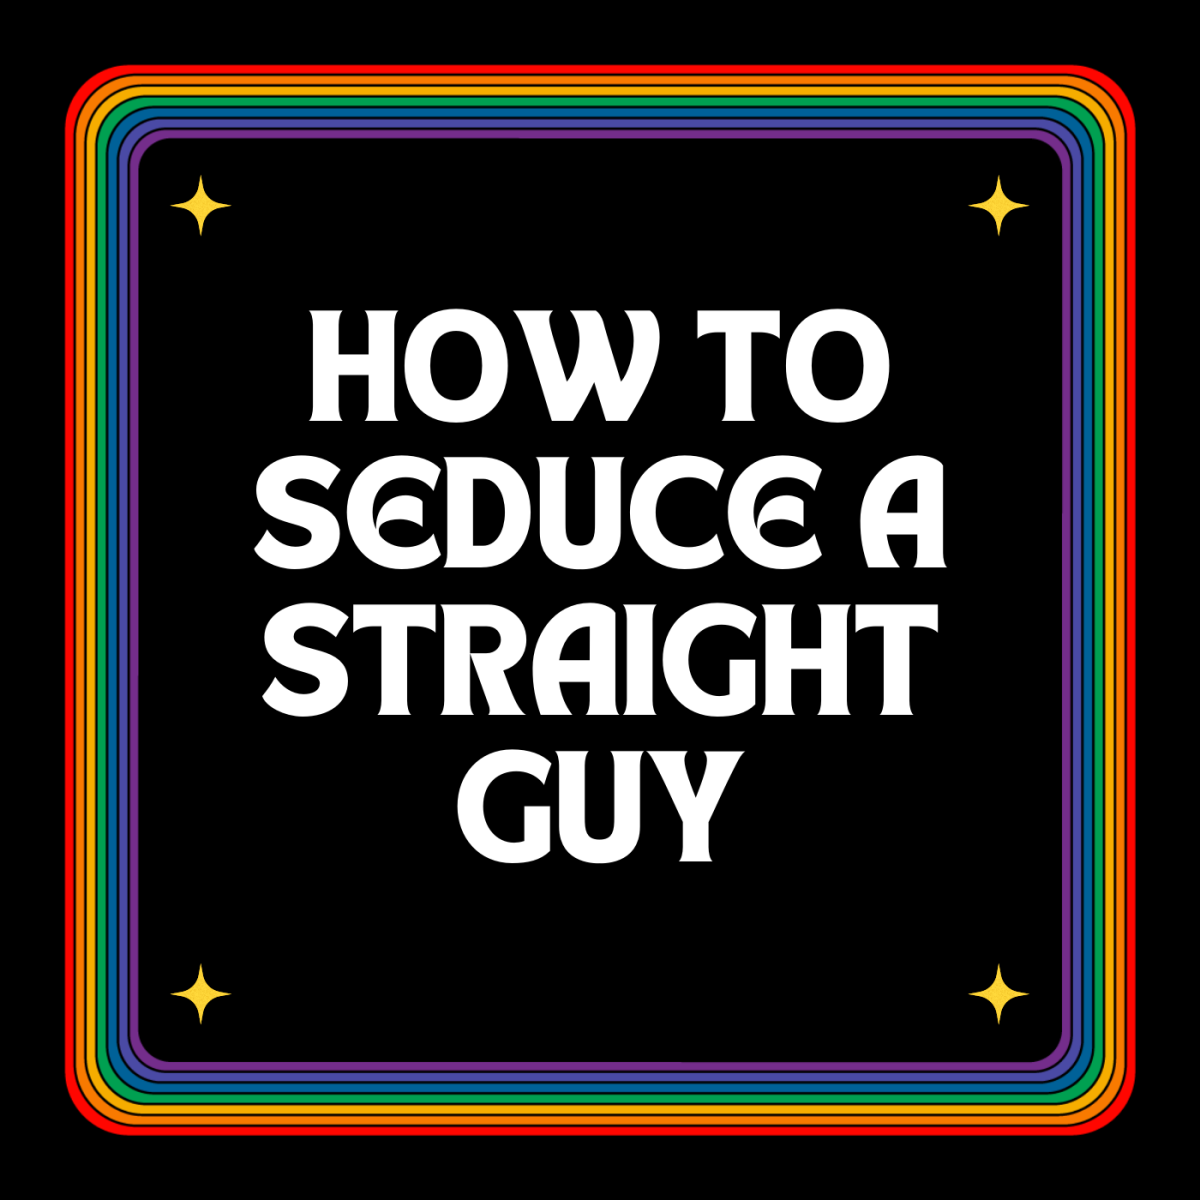 How to Seduce a Straight Guy in 8 Easy Steps